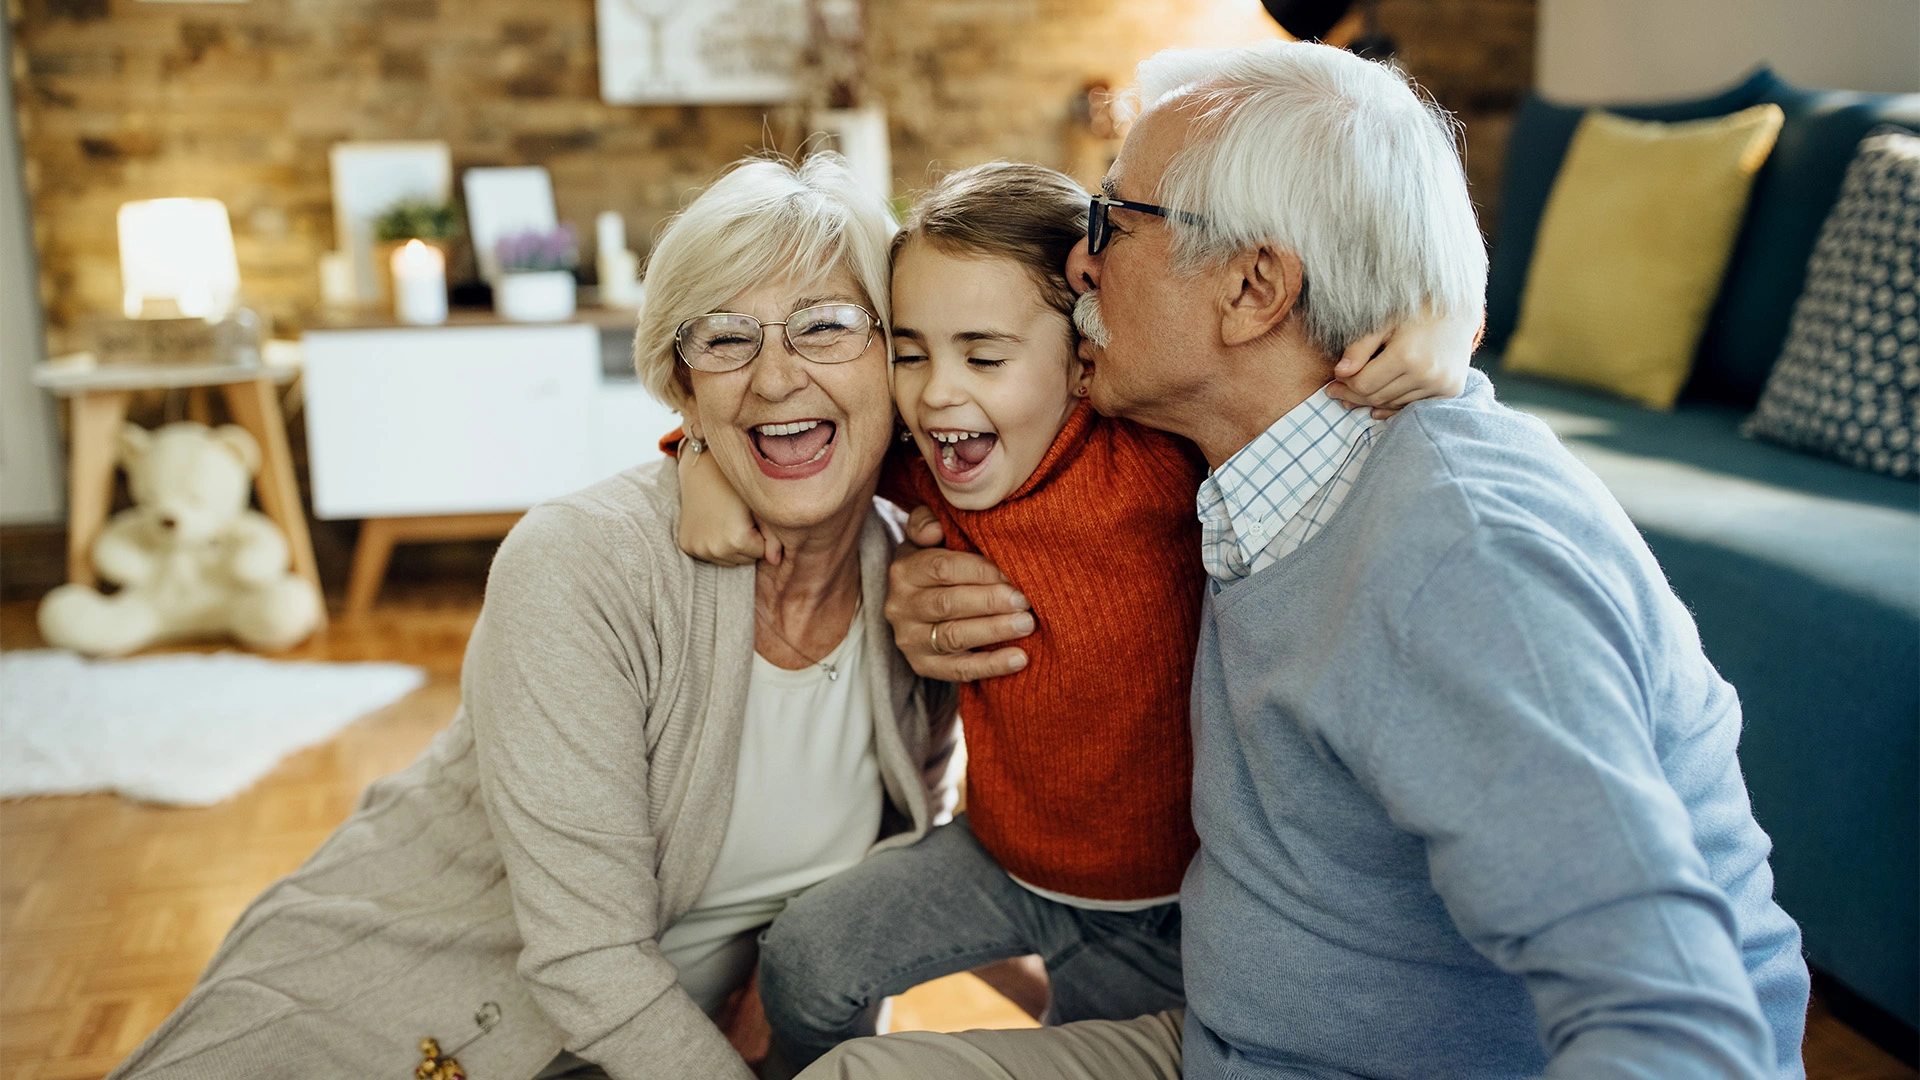 cheerful-grandparents-granddaughter-having-fun-together-home